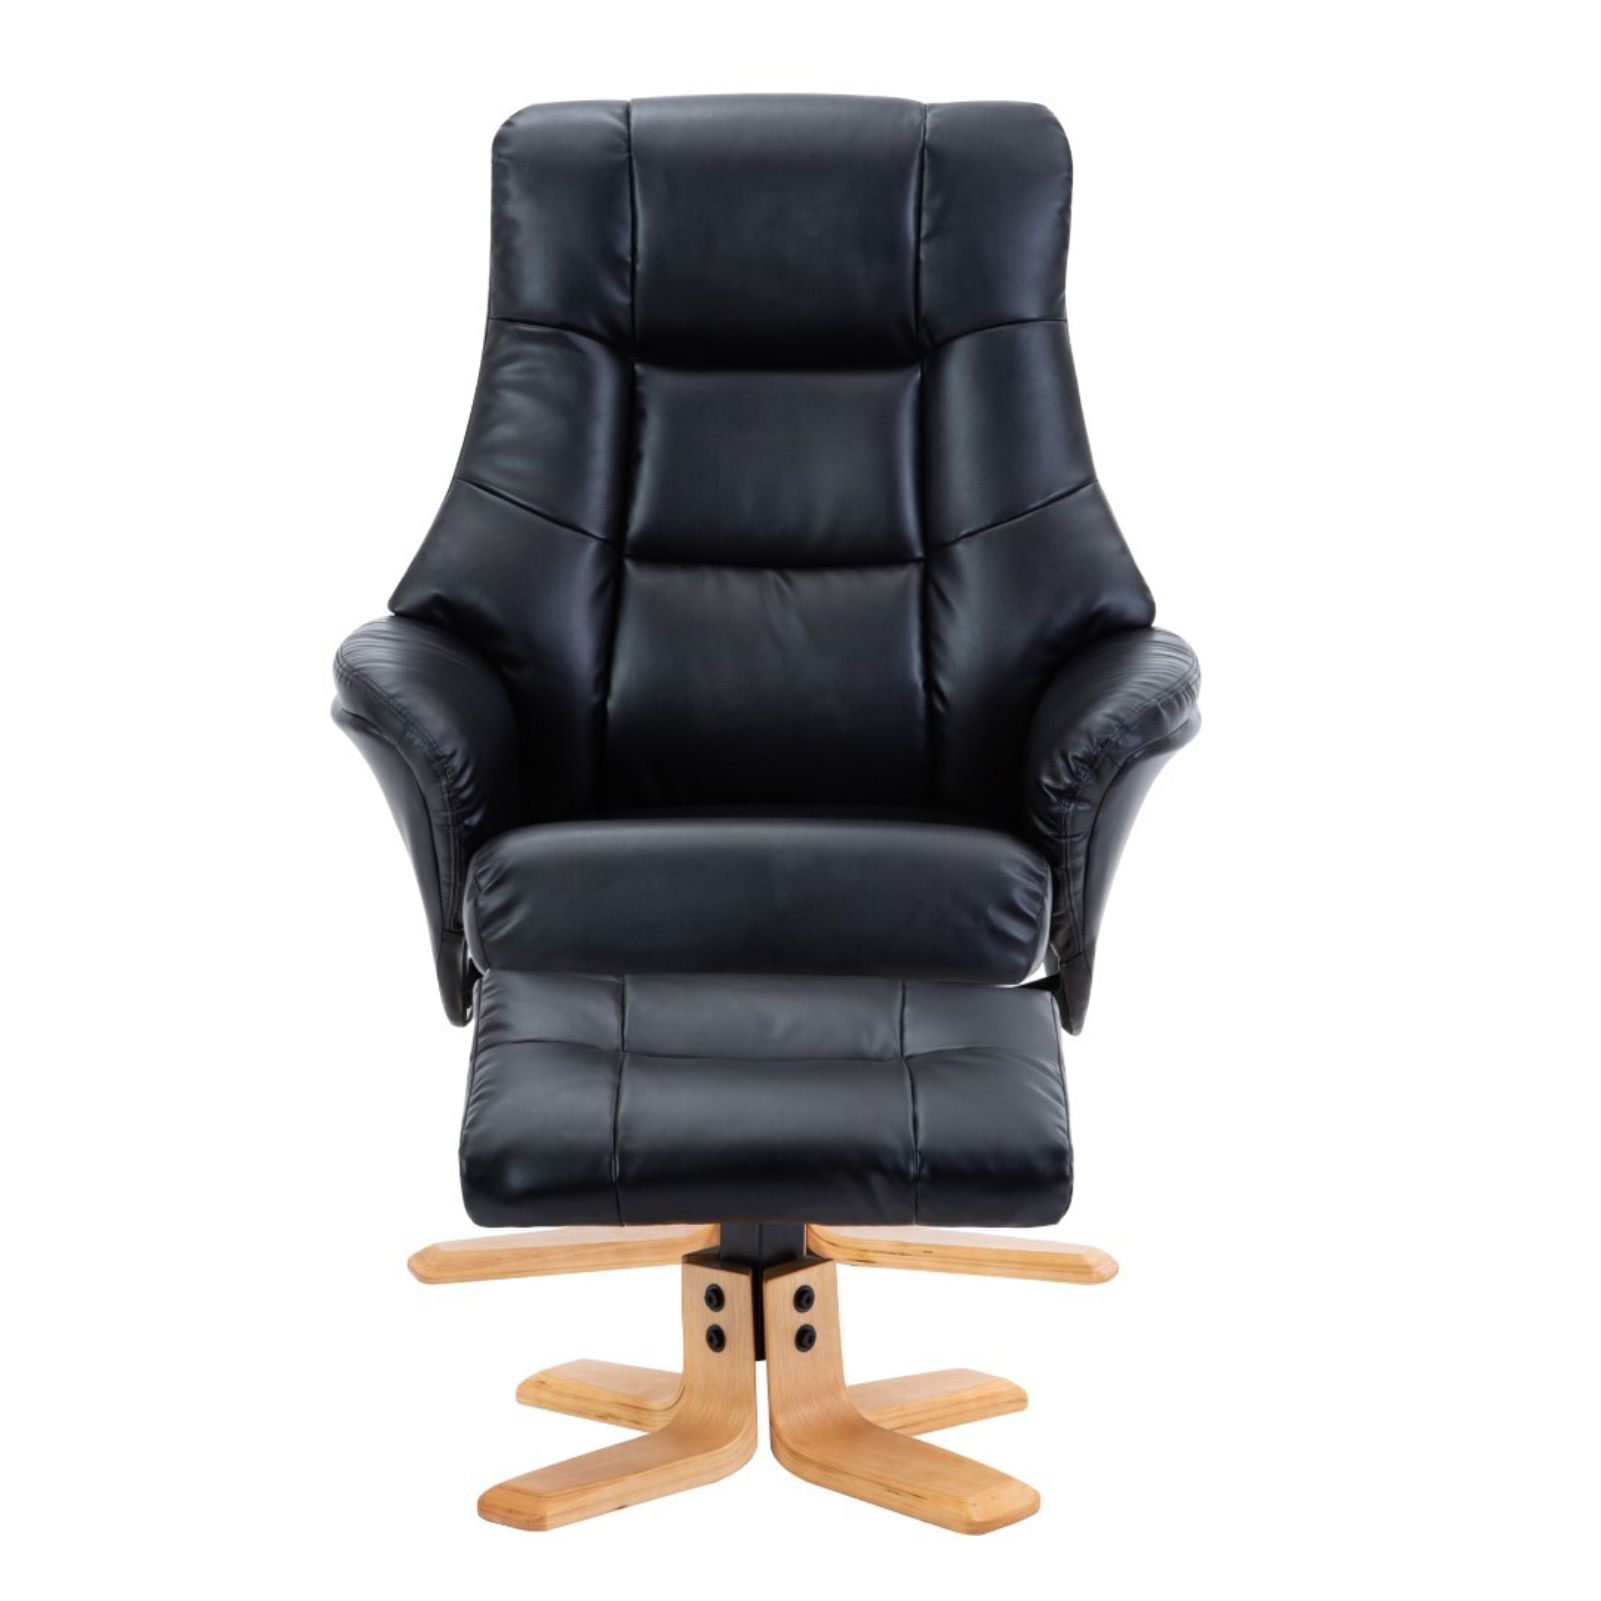 Newest The Bari – Faux Leather Swivel Recliner Chair & Footstool In Black Intended For Black Faux Leather Swivel Recliners (View 5 of 10)